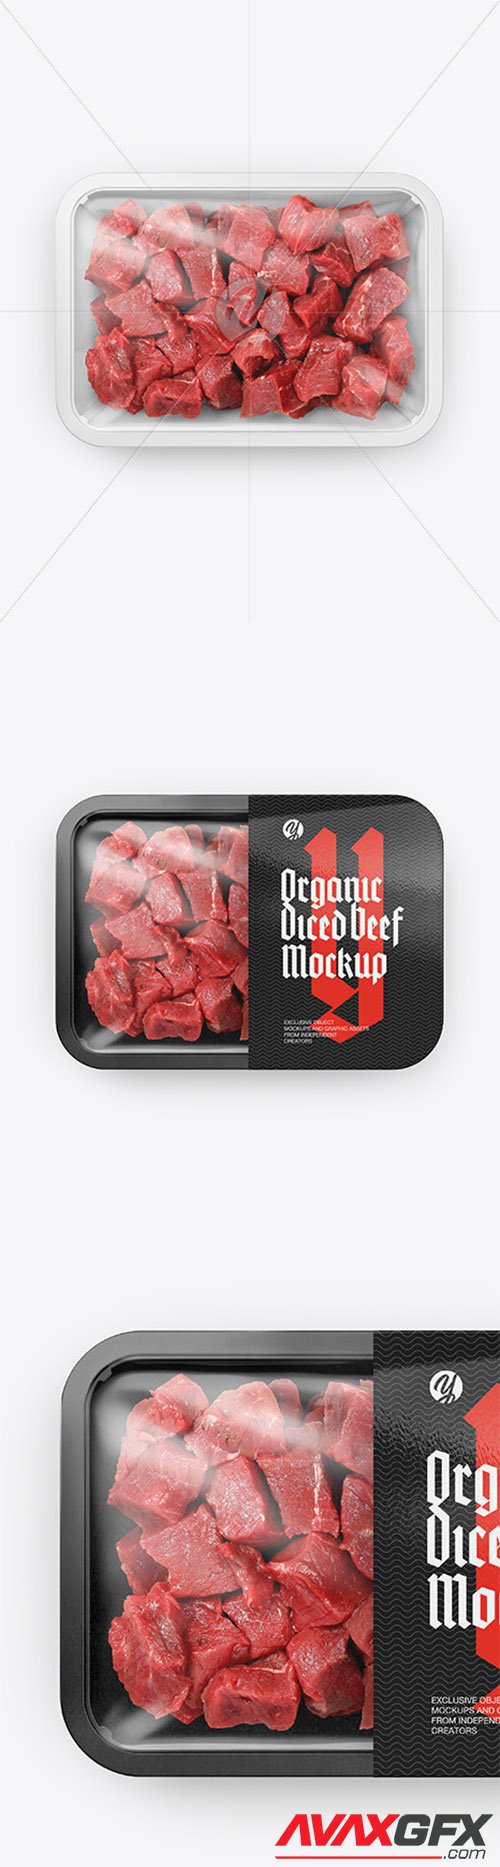 Plastic Tray With Diced Beef Mockup 83396 TIF